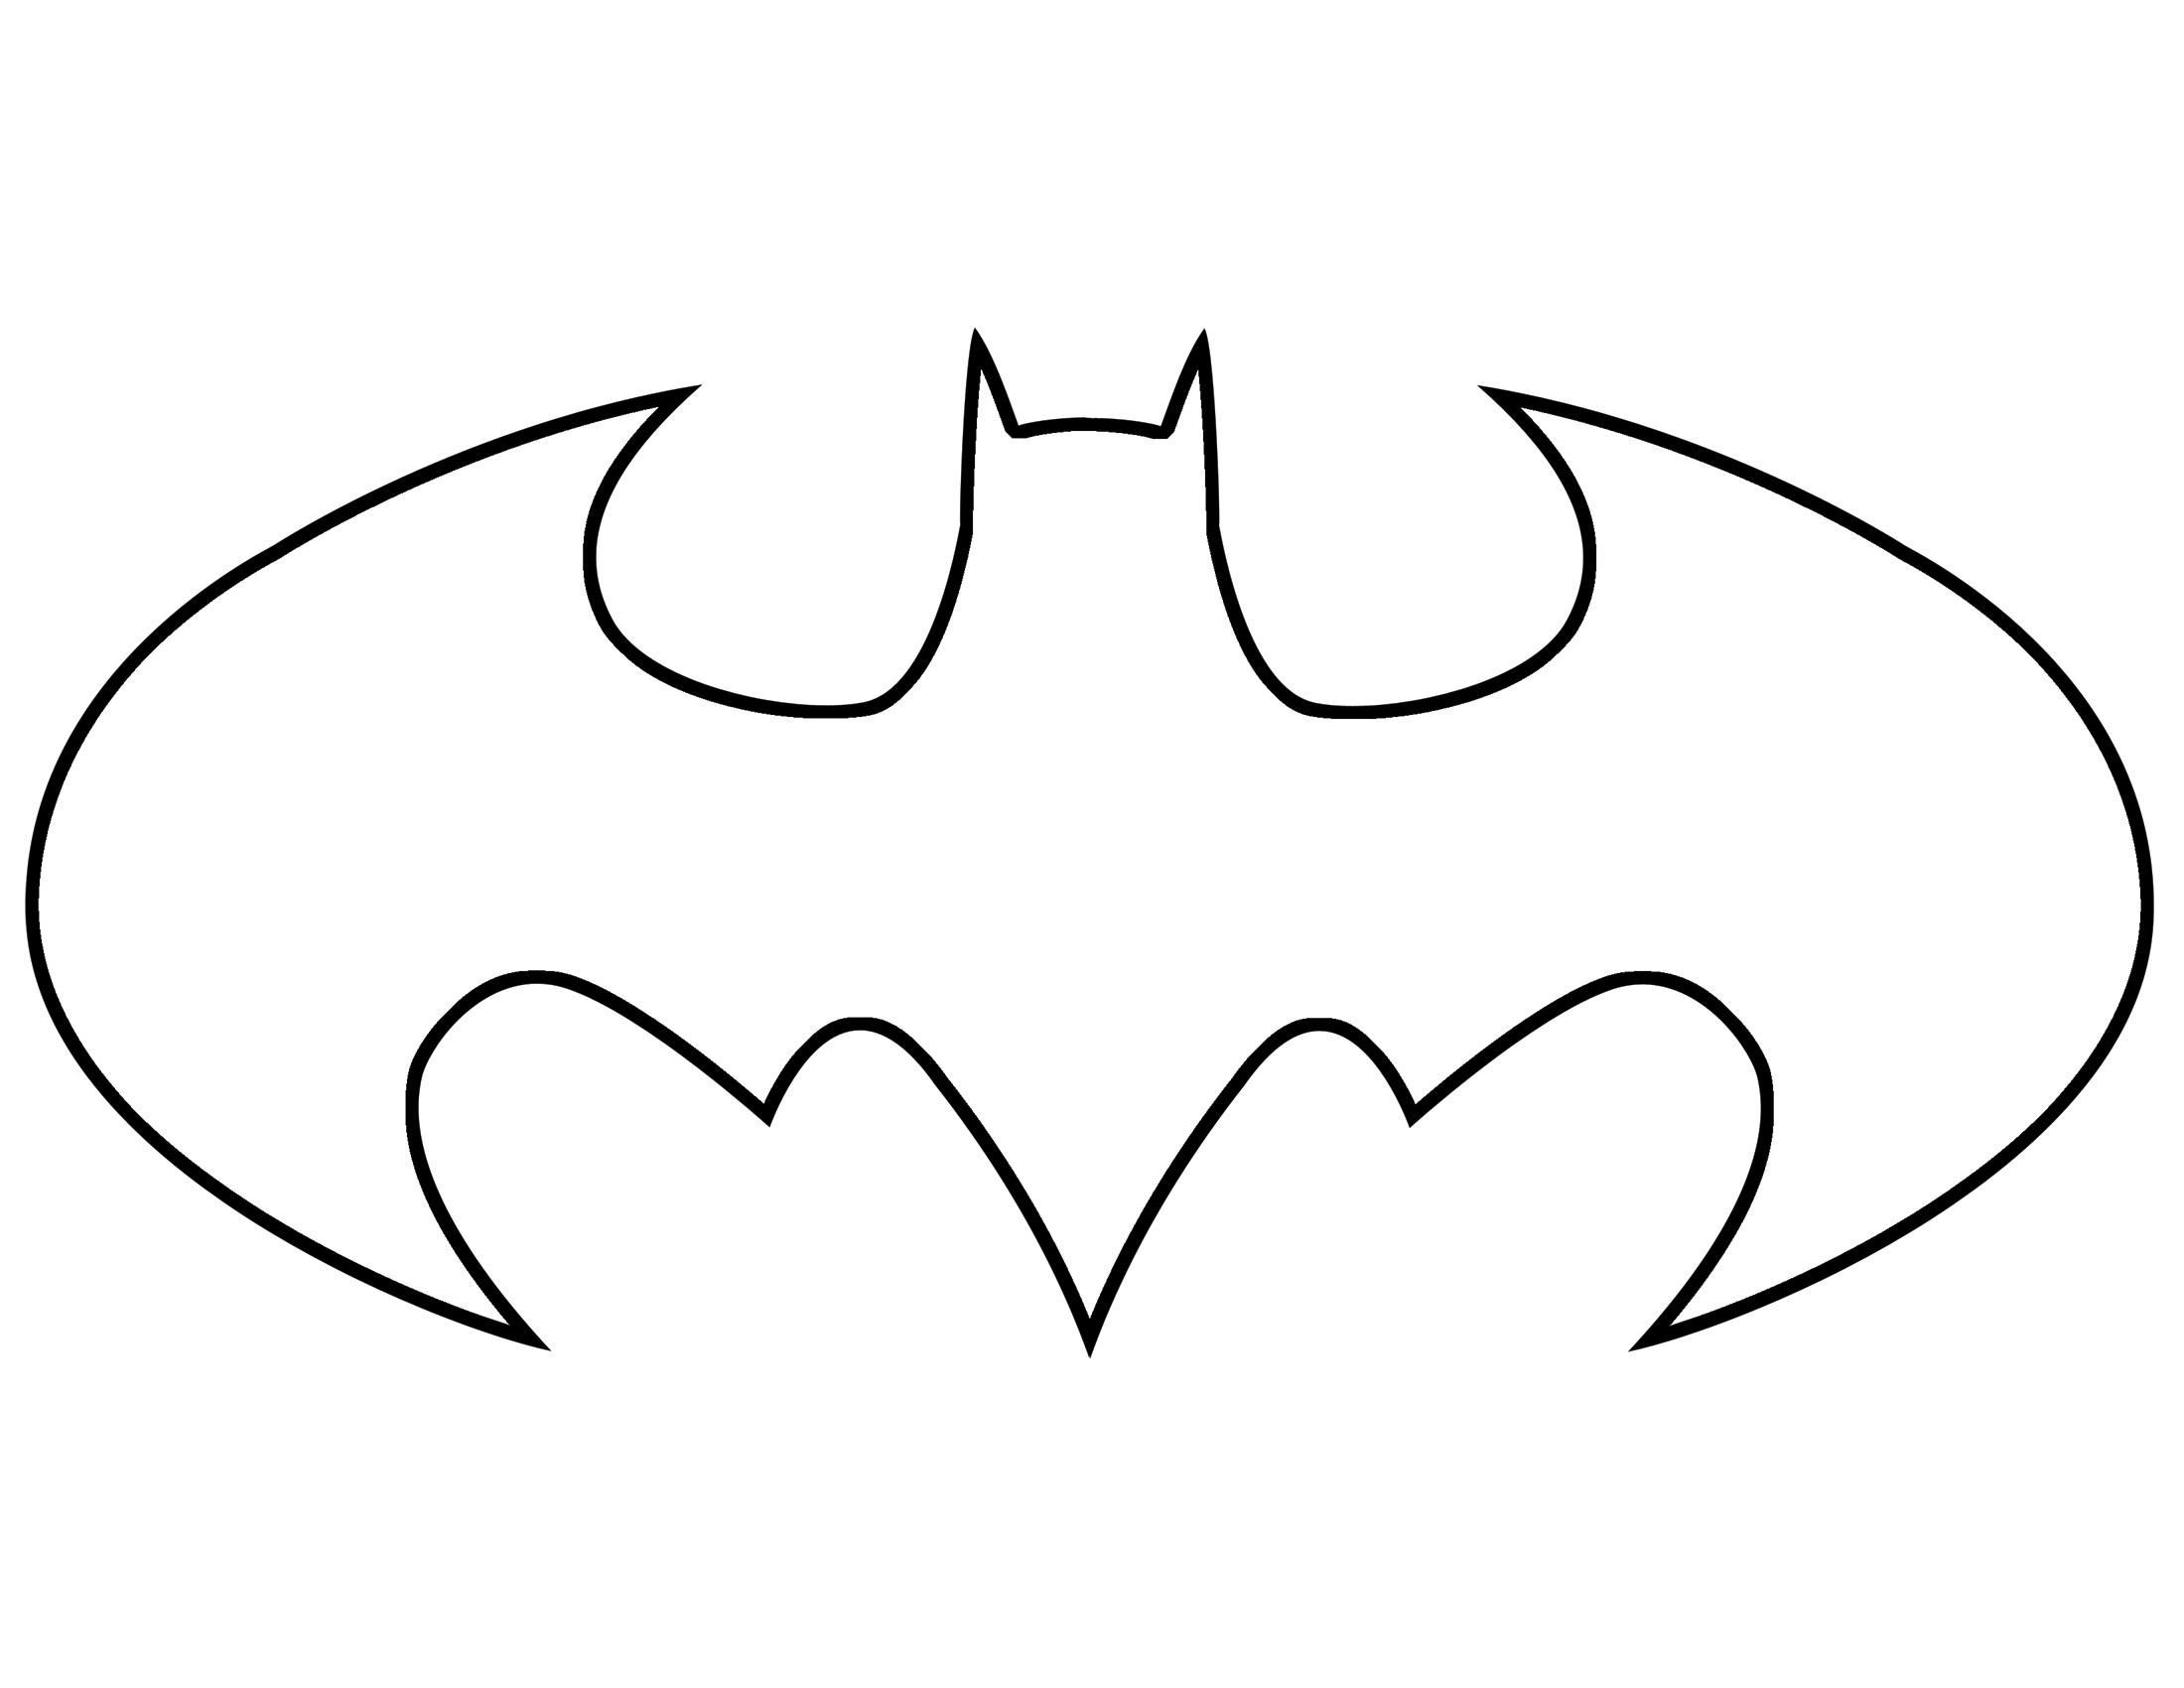 Free Batman Stencils Download Free Batman Stencils Png Images Free Cliparts On Clipart Library